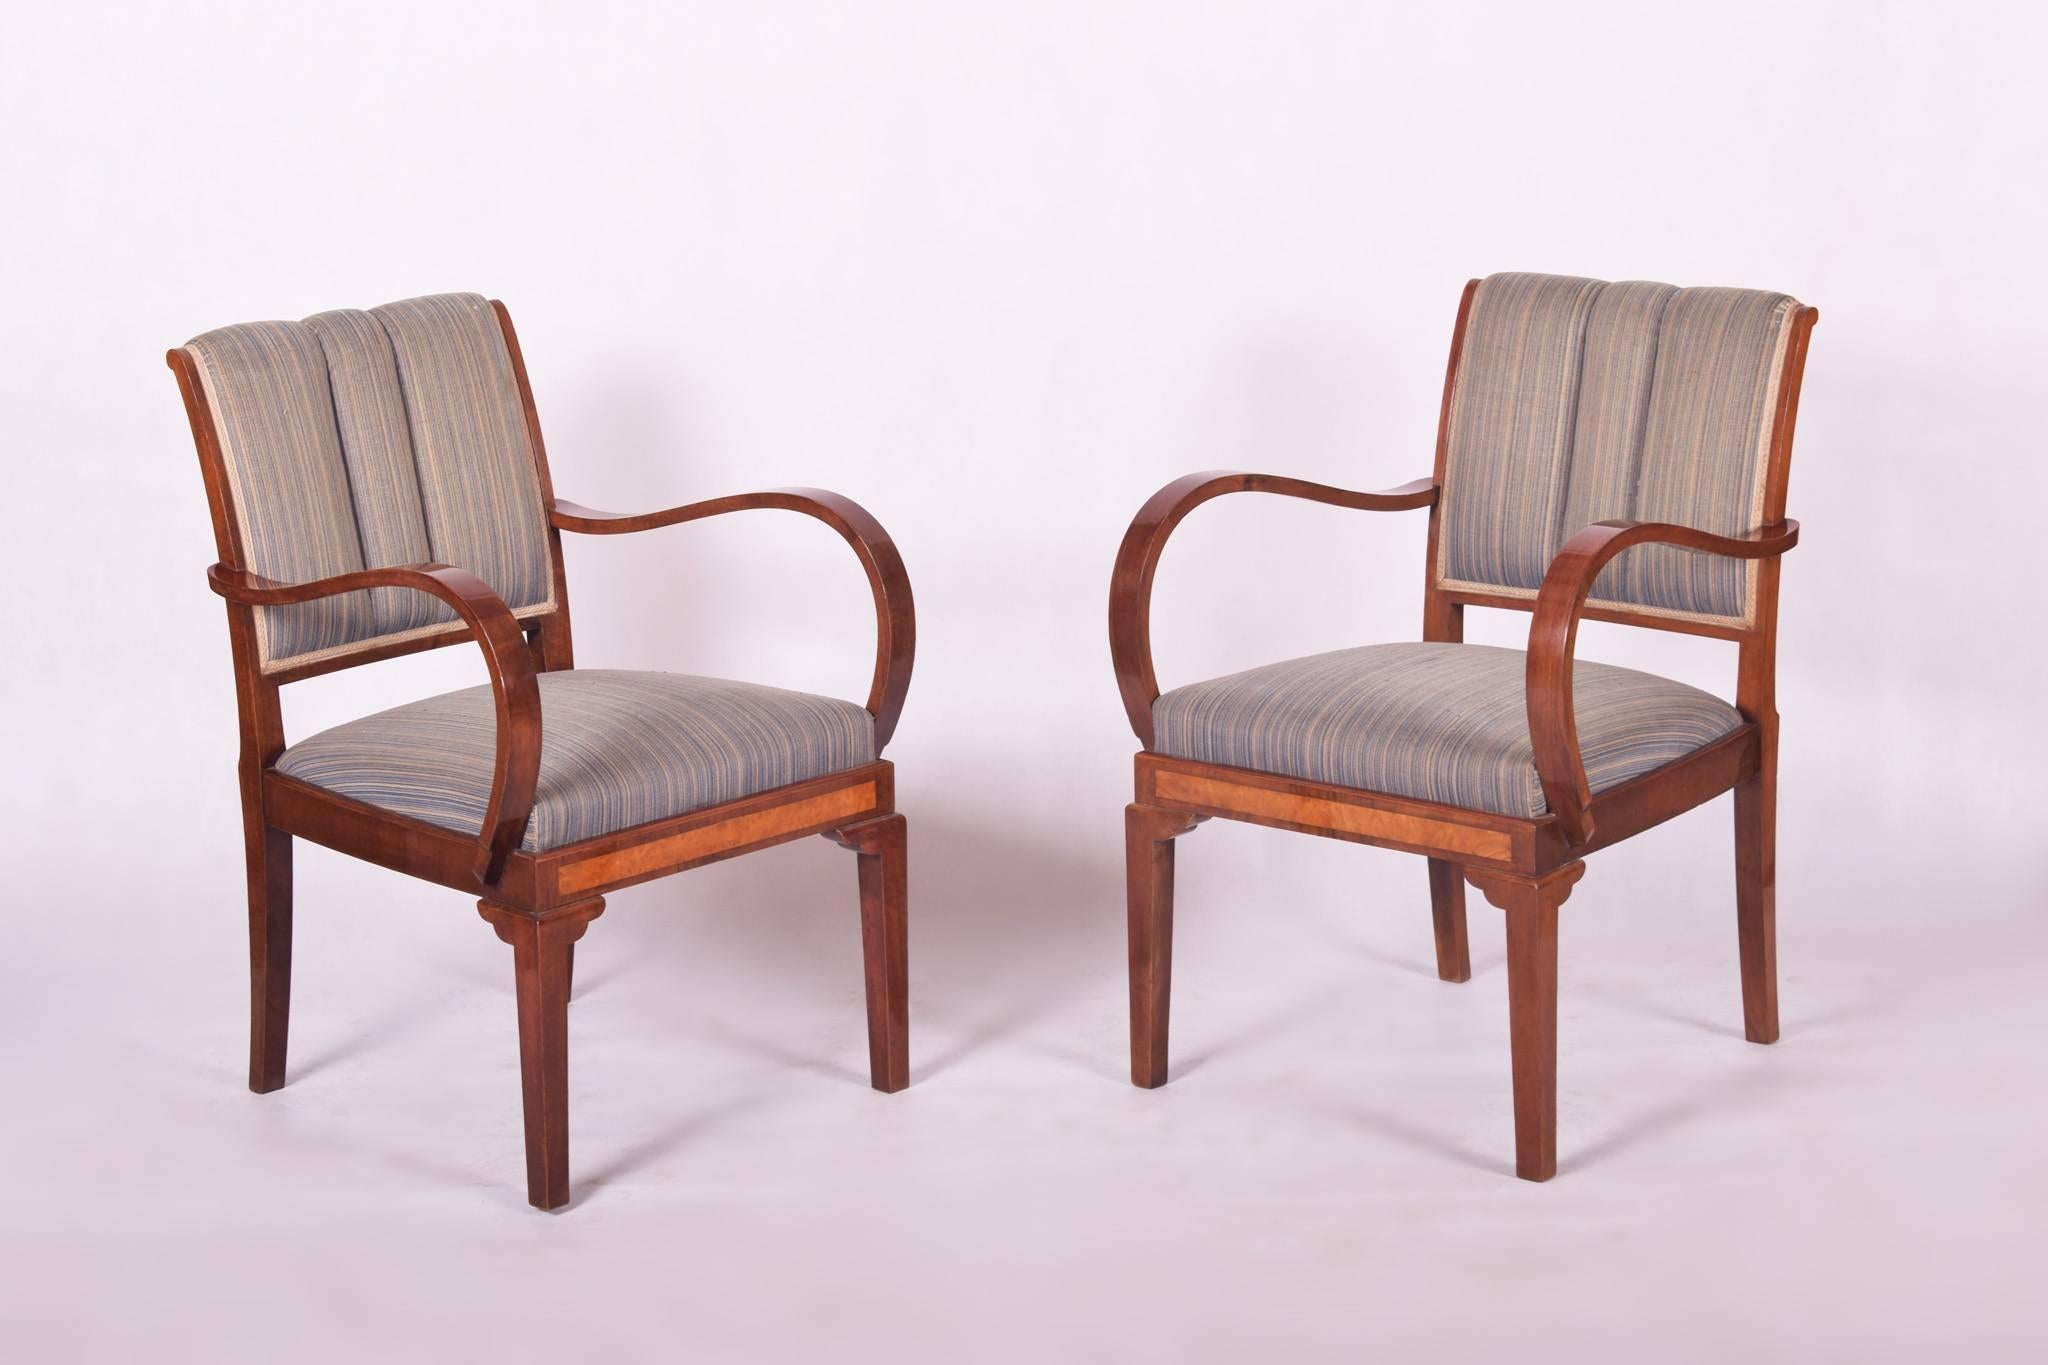 Pair of Art Deco armchairs.
Completely restored, surface made by shellac polish.
Material: Combination of walnut and maple
Well-preserved original upholstery.

We guarantee safe a the cheapest air transport from Europe to the whole world within 7